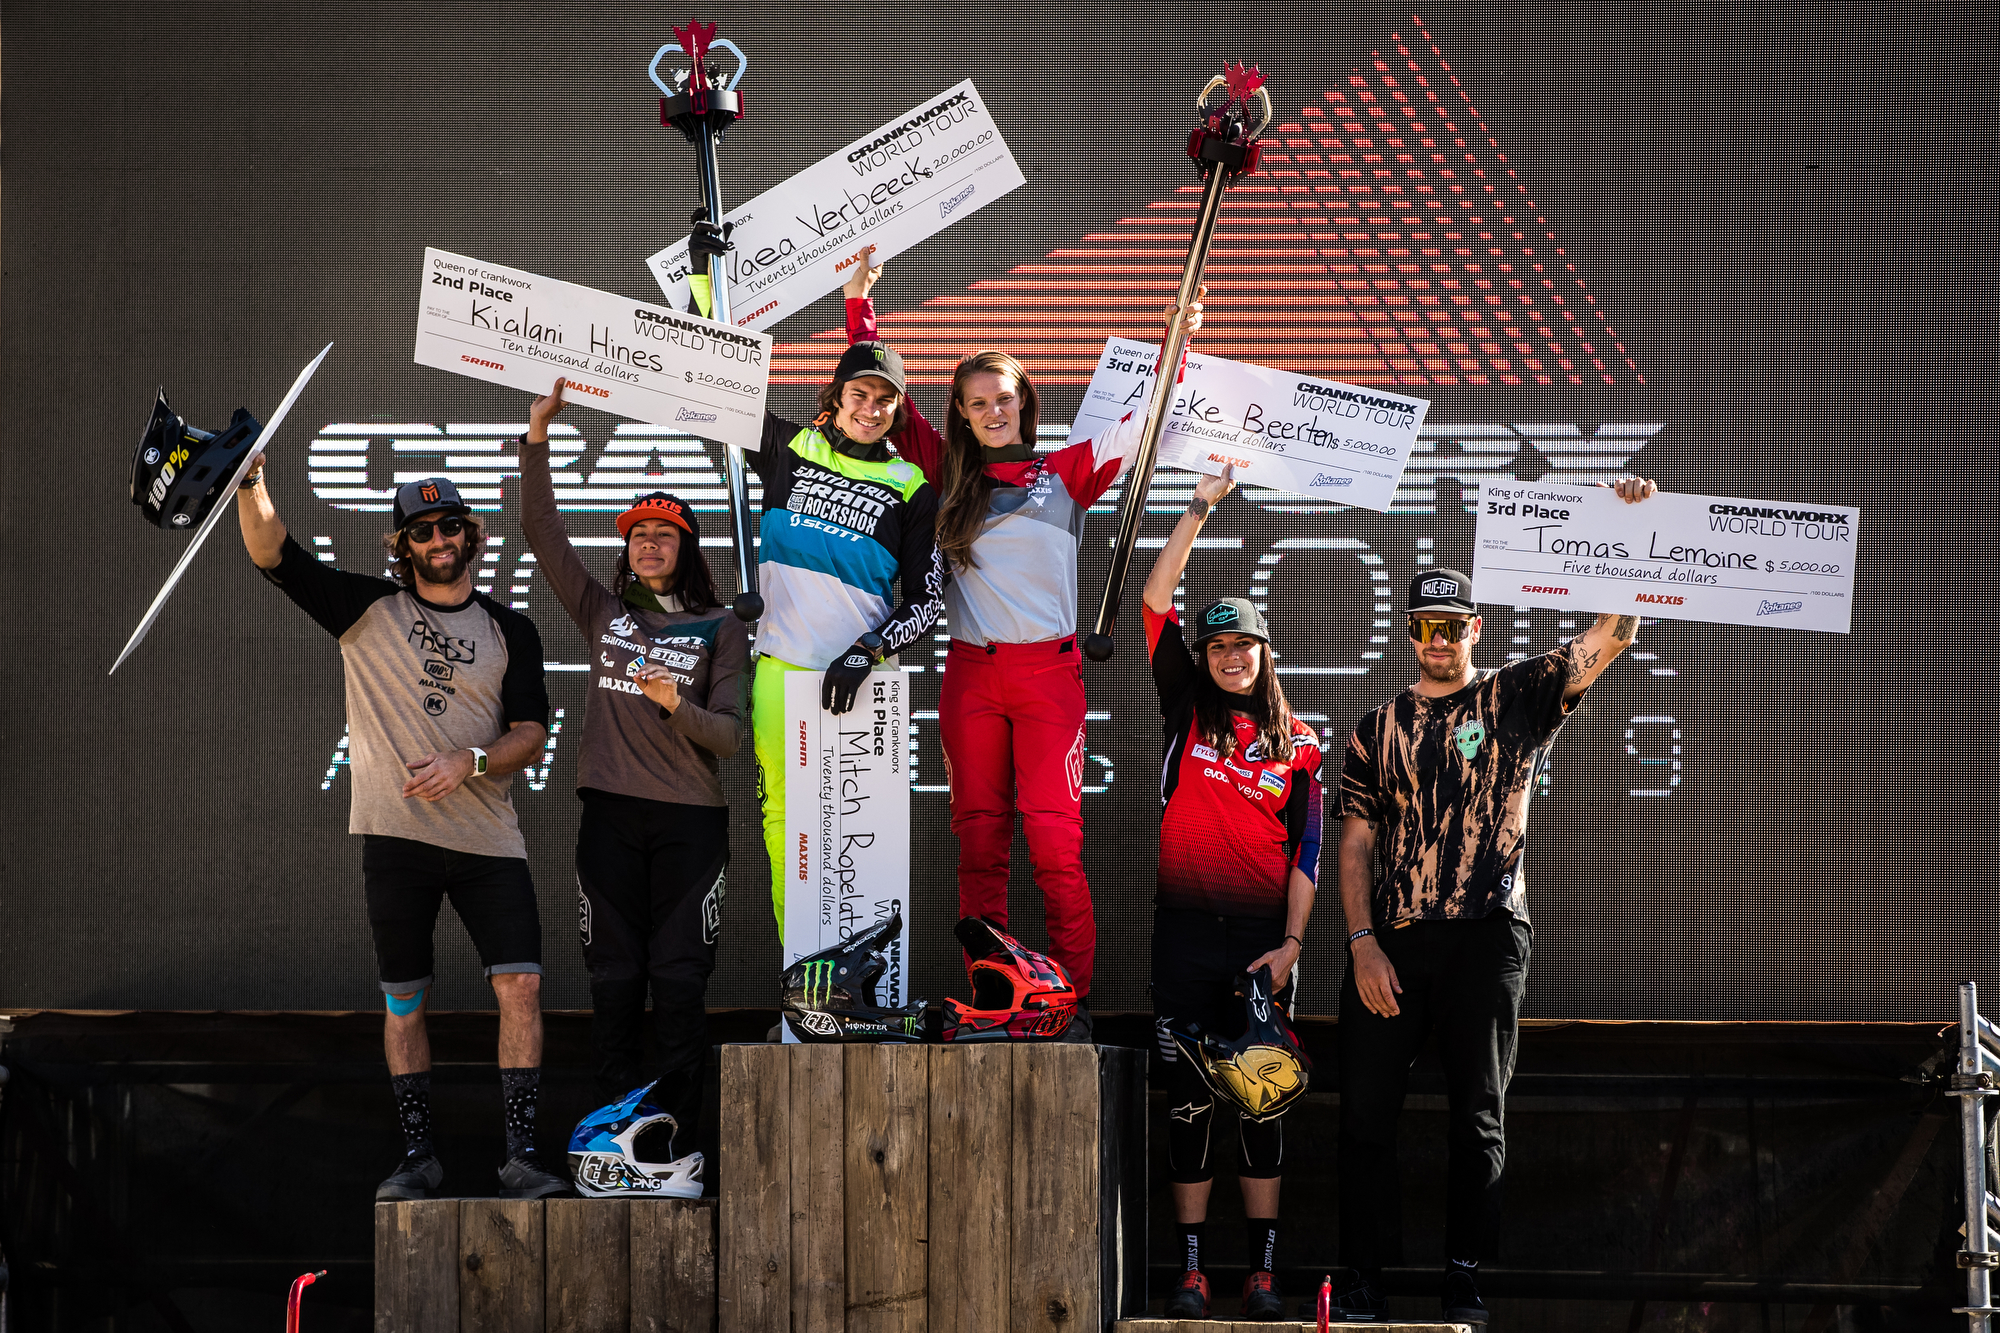 Vaea Verbeeck stands tall on the podium as the new Queen of Crankworx.